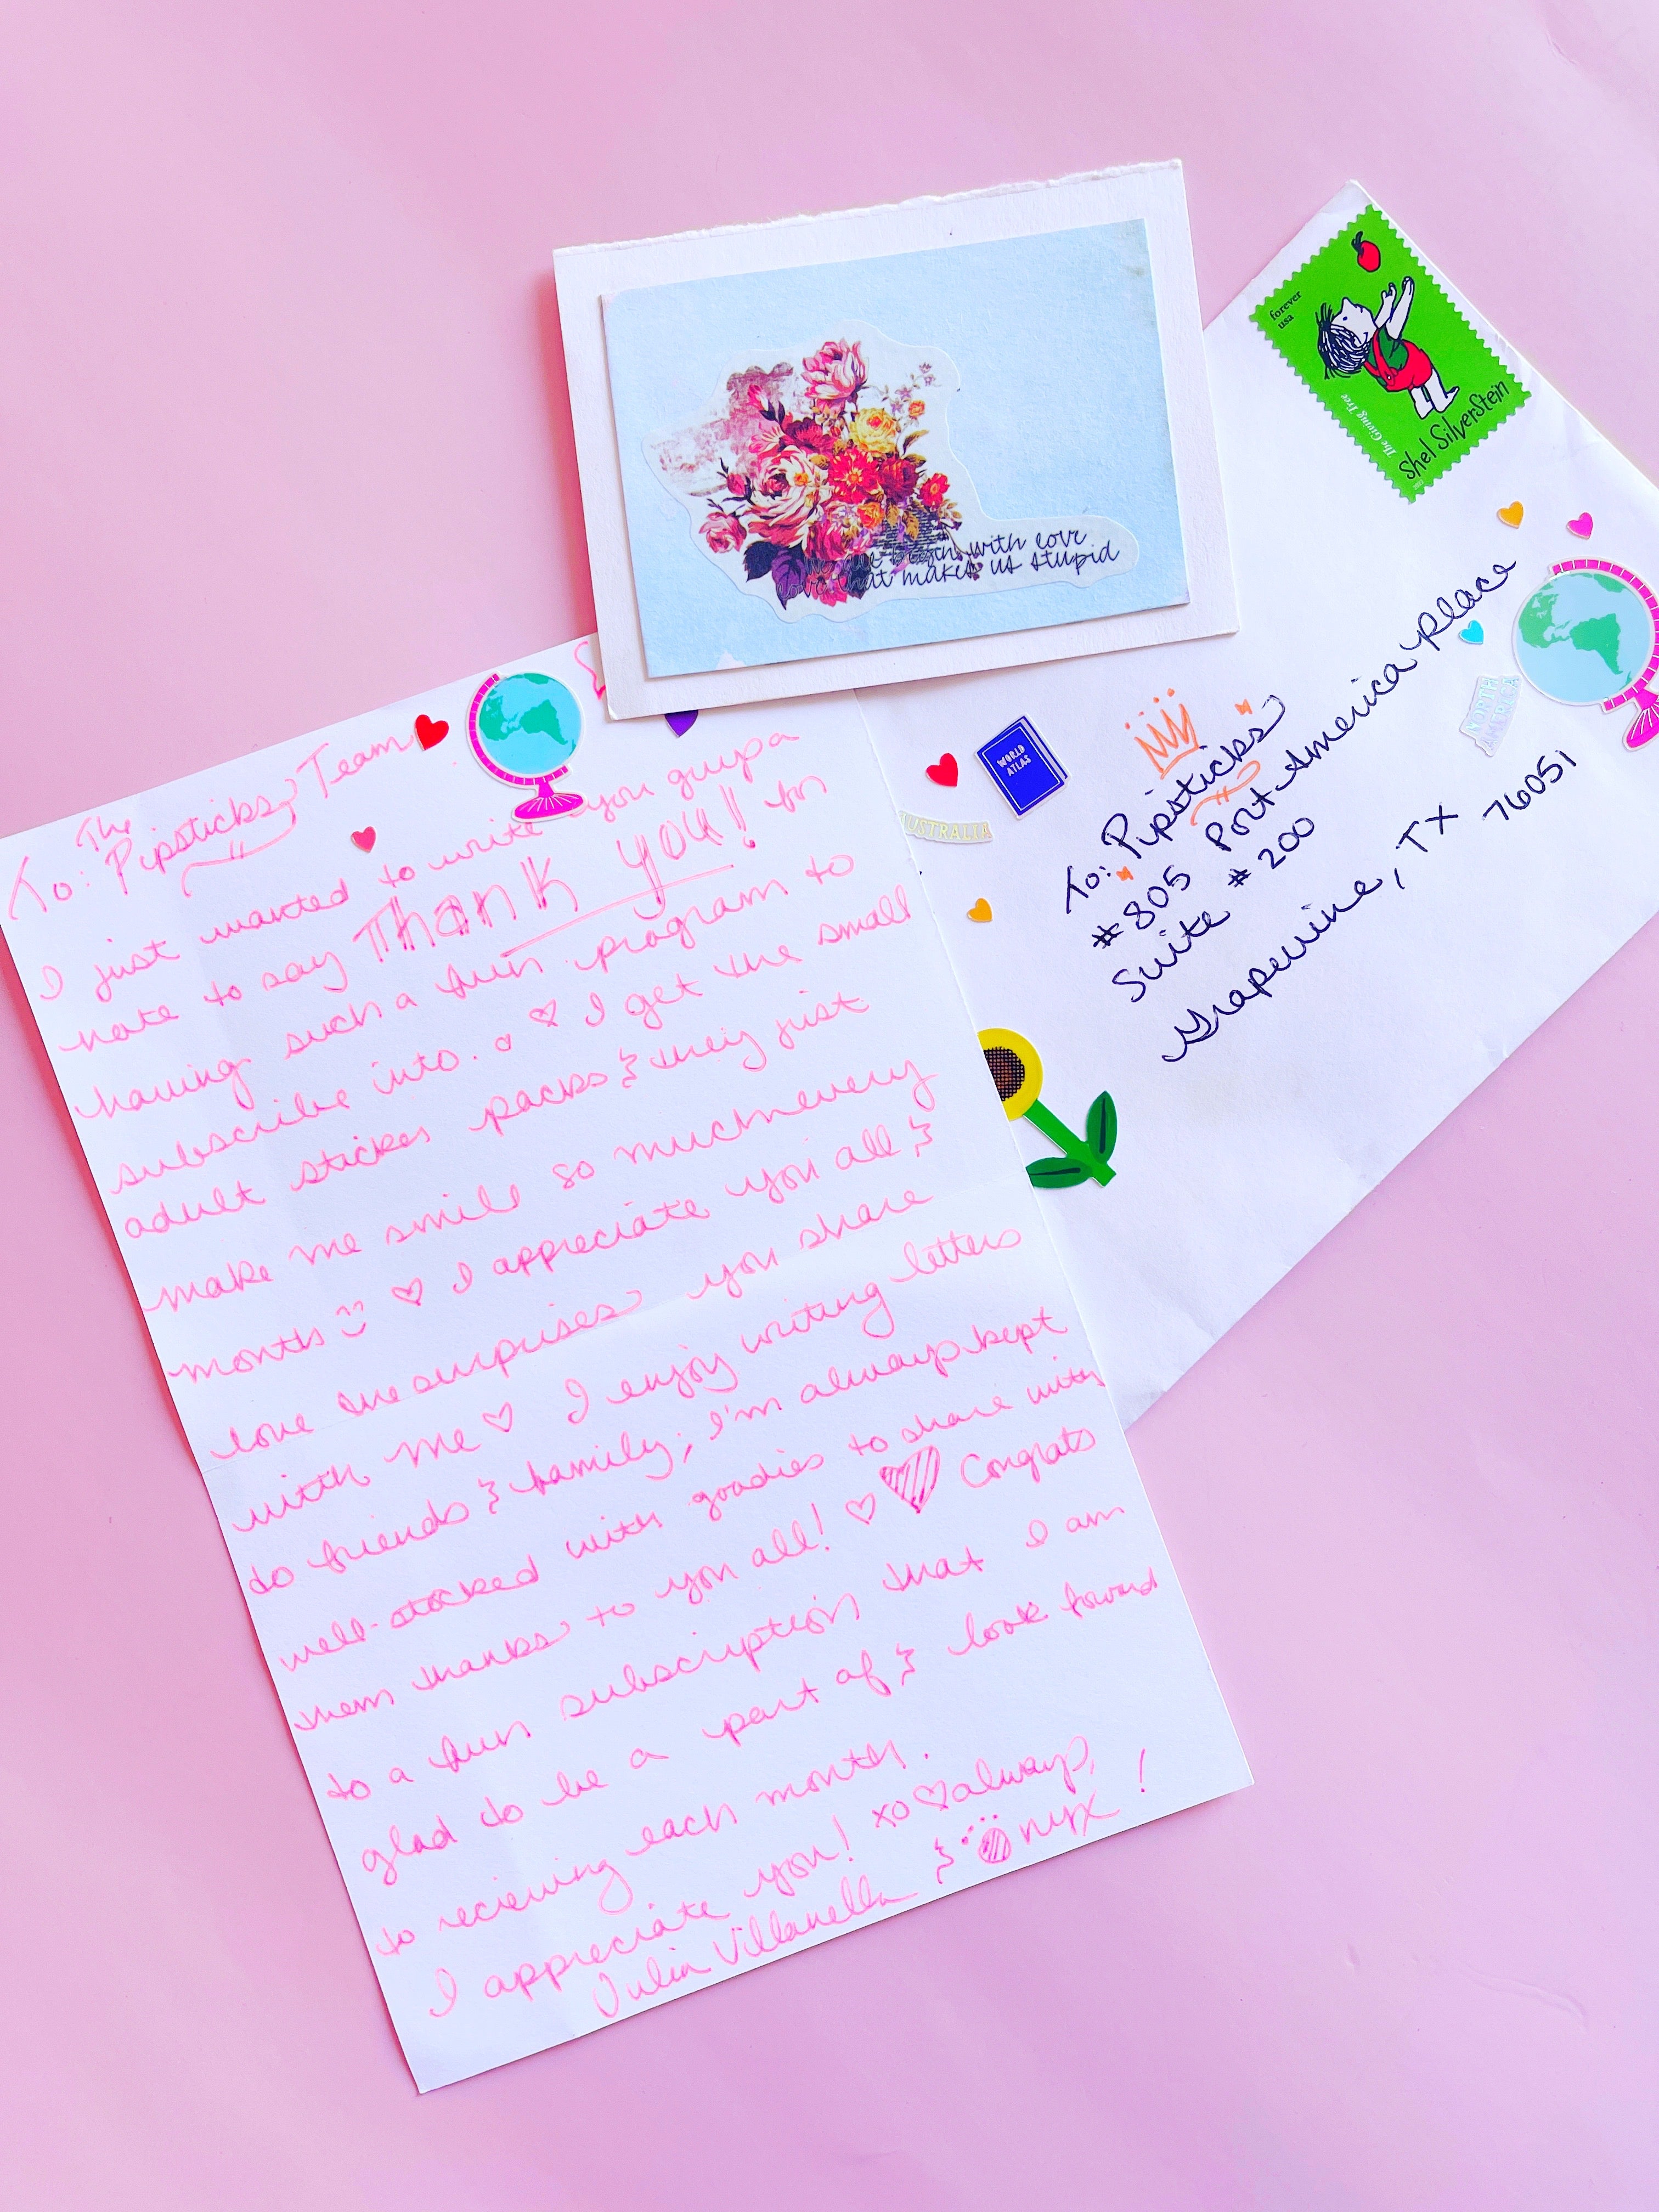 Fanmail Friday: “How FANTASTIC – Pips in the wild!!”